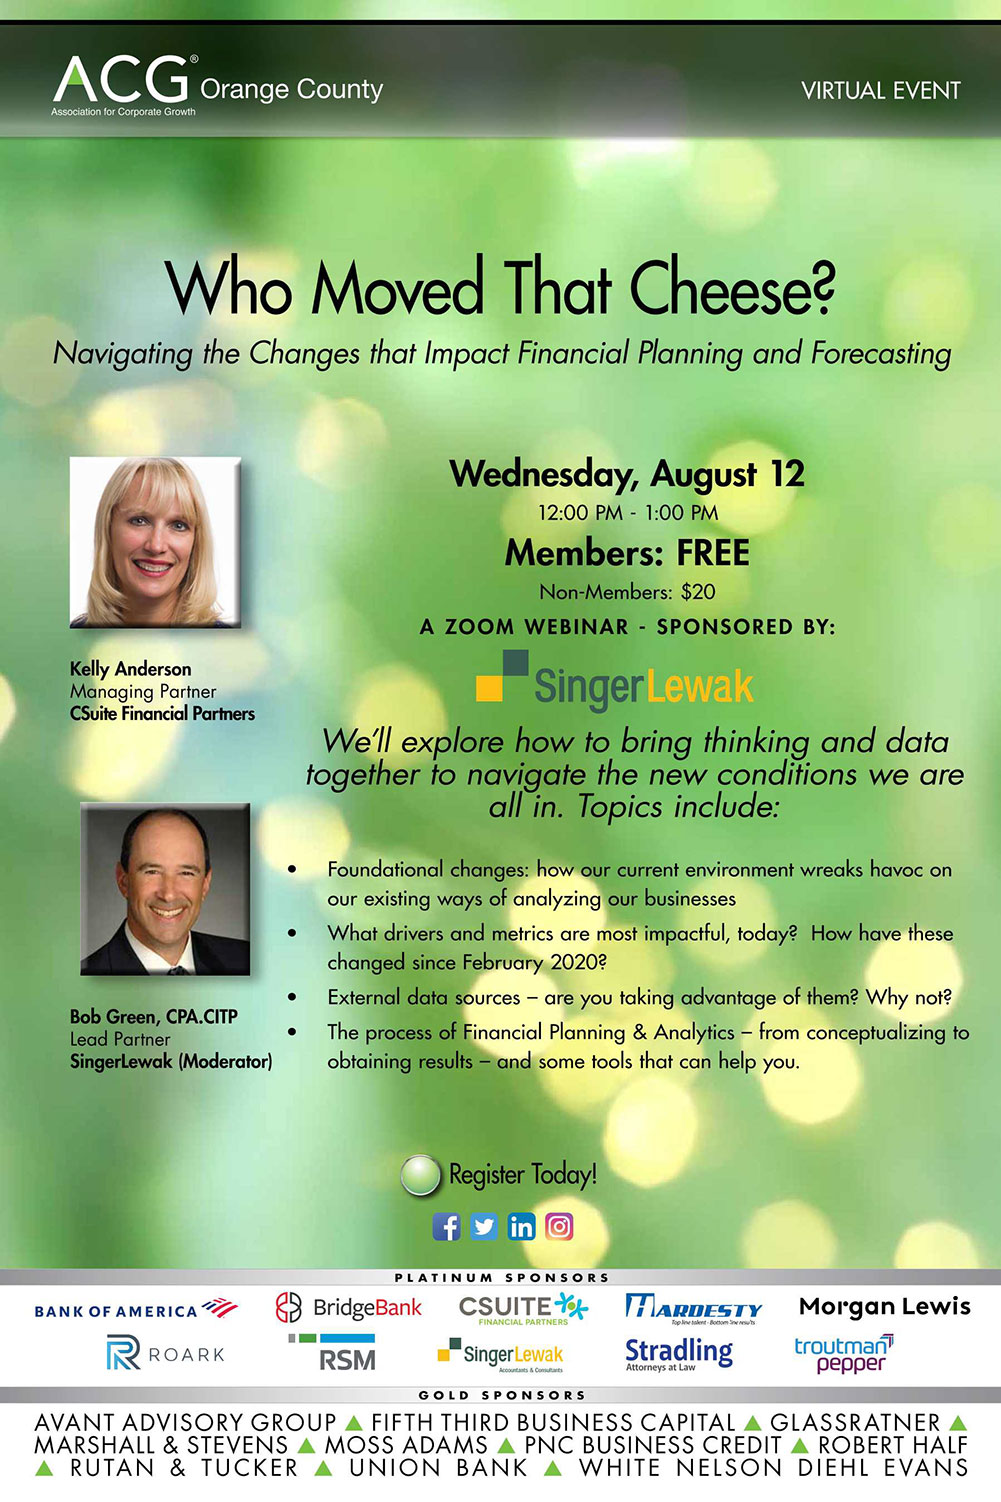 Poster for "Who Moved That Cheese" Zoom Webinar Sponsored by SingerLewak